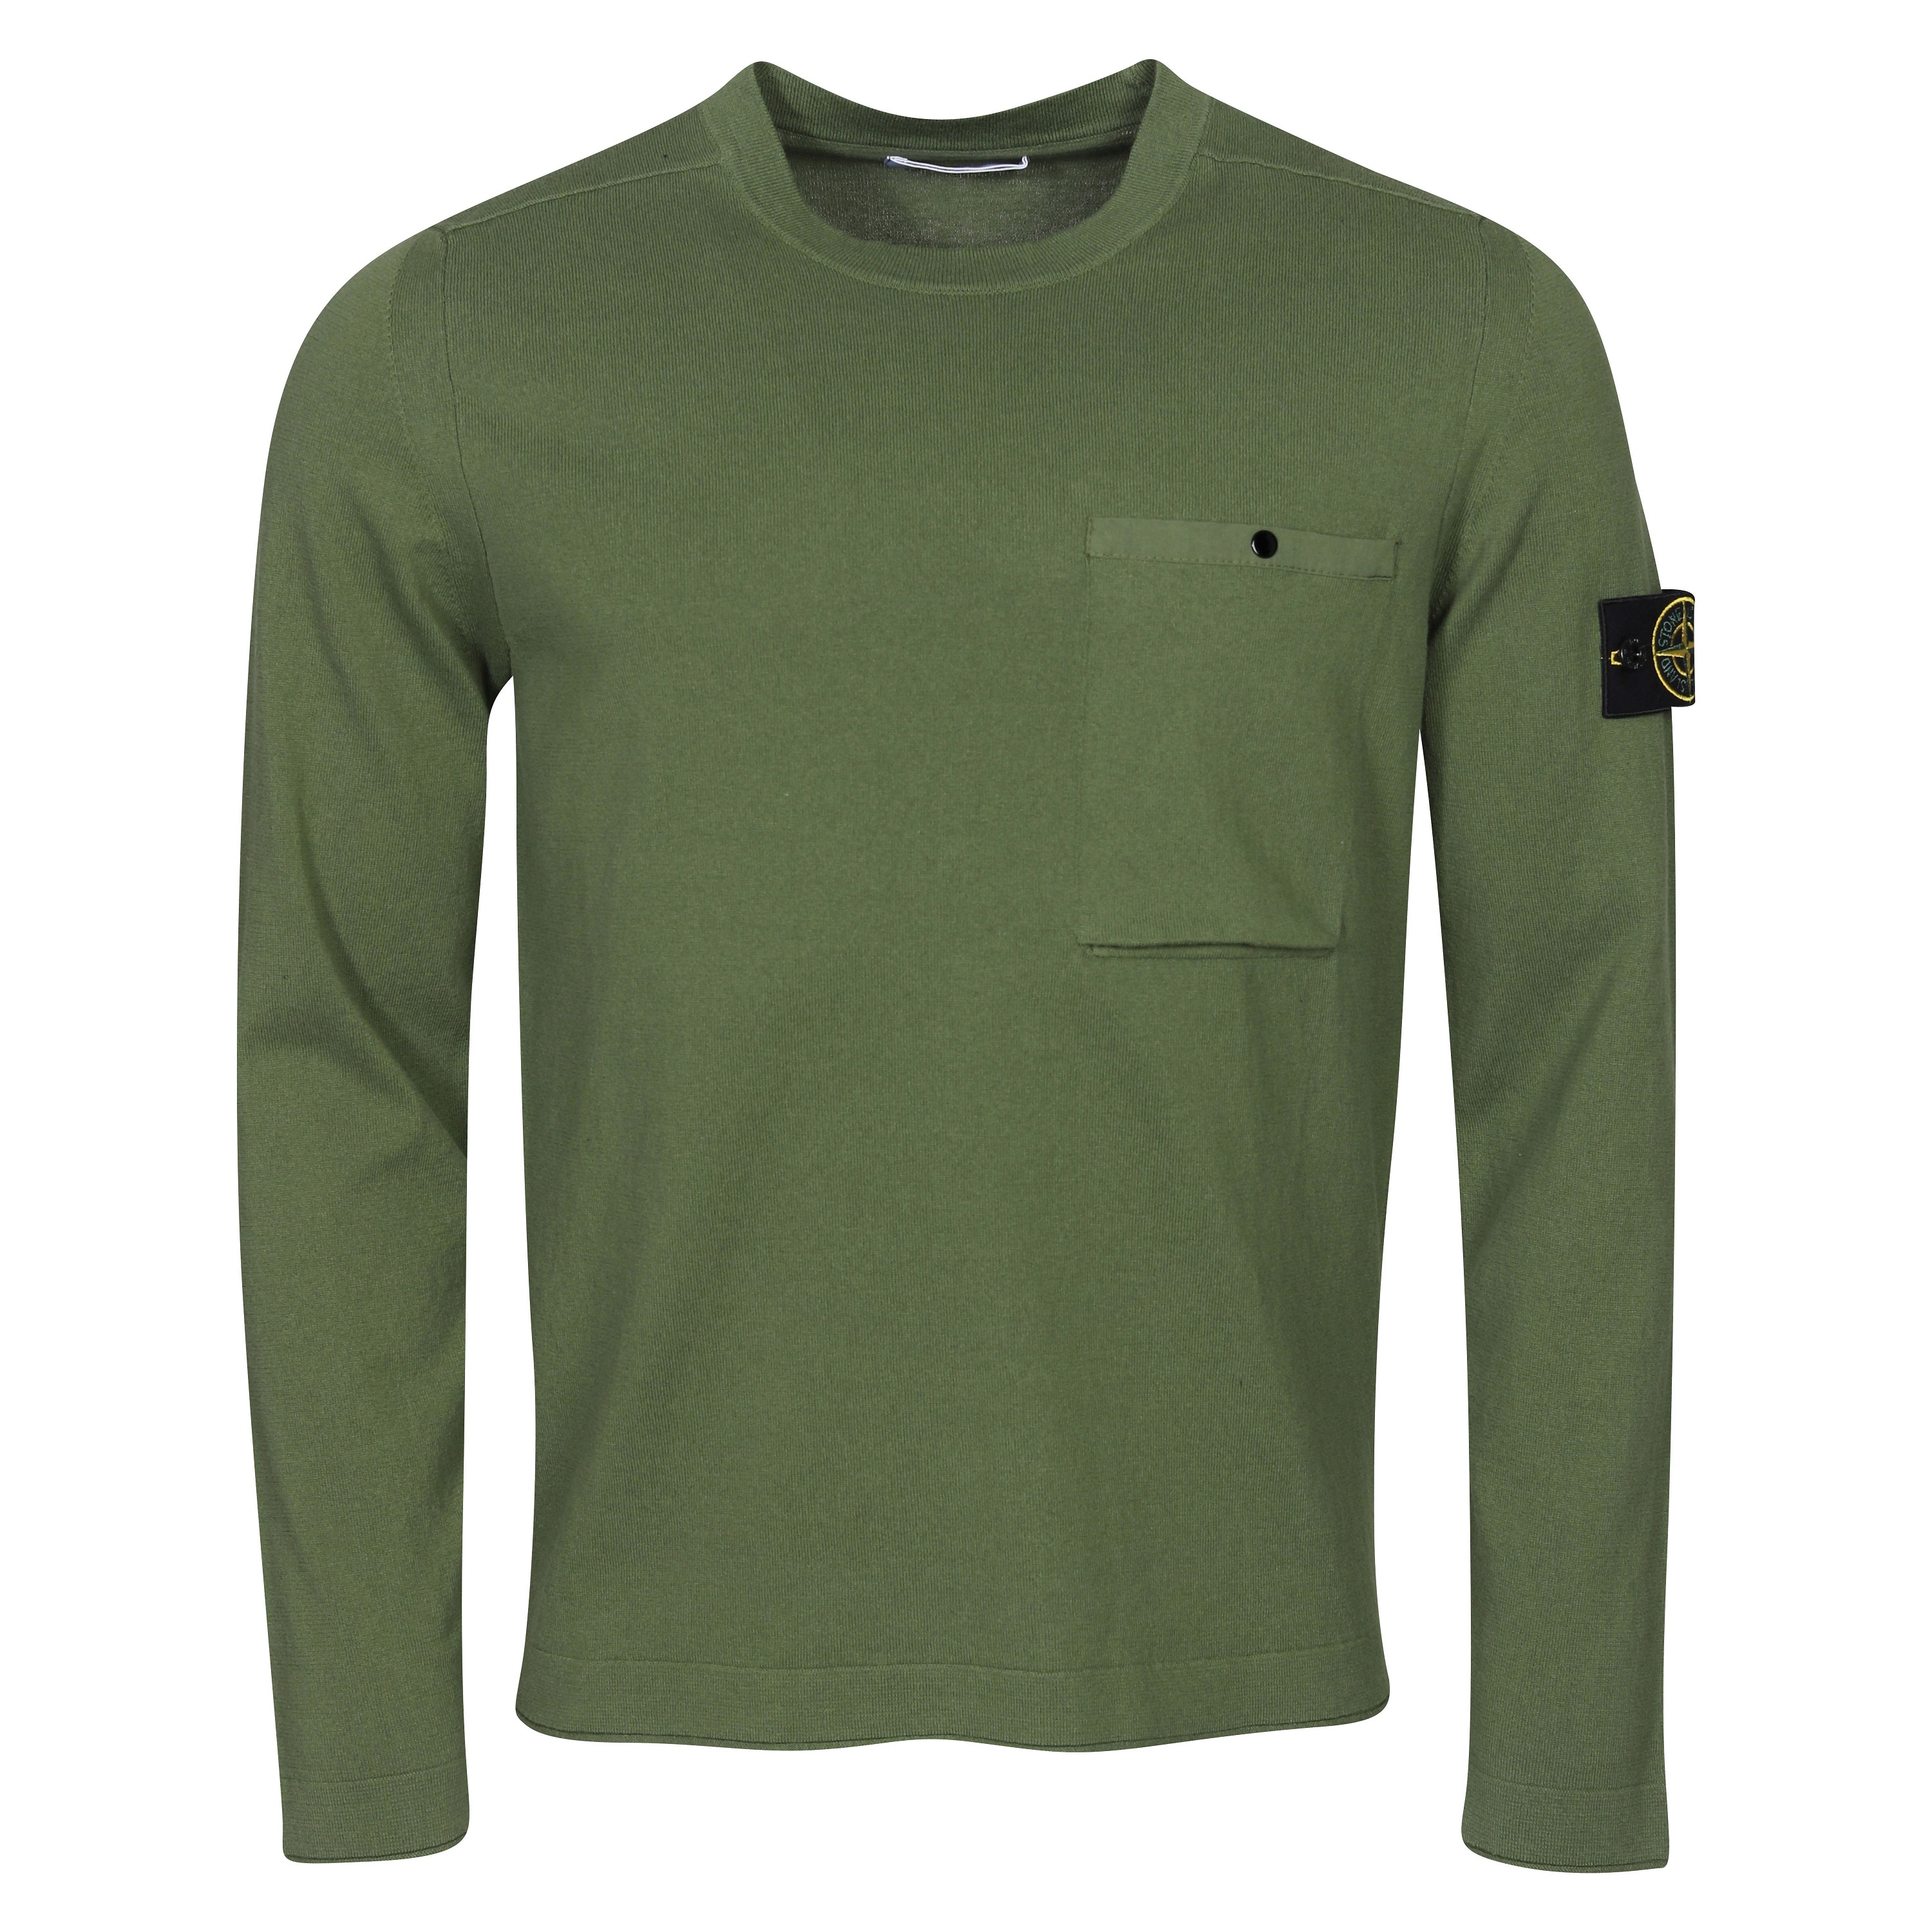 Stone Island Chest Pocket Knit Sweater in Olive  2XL